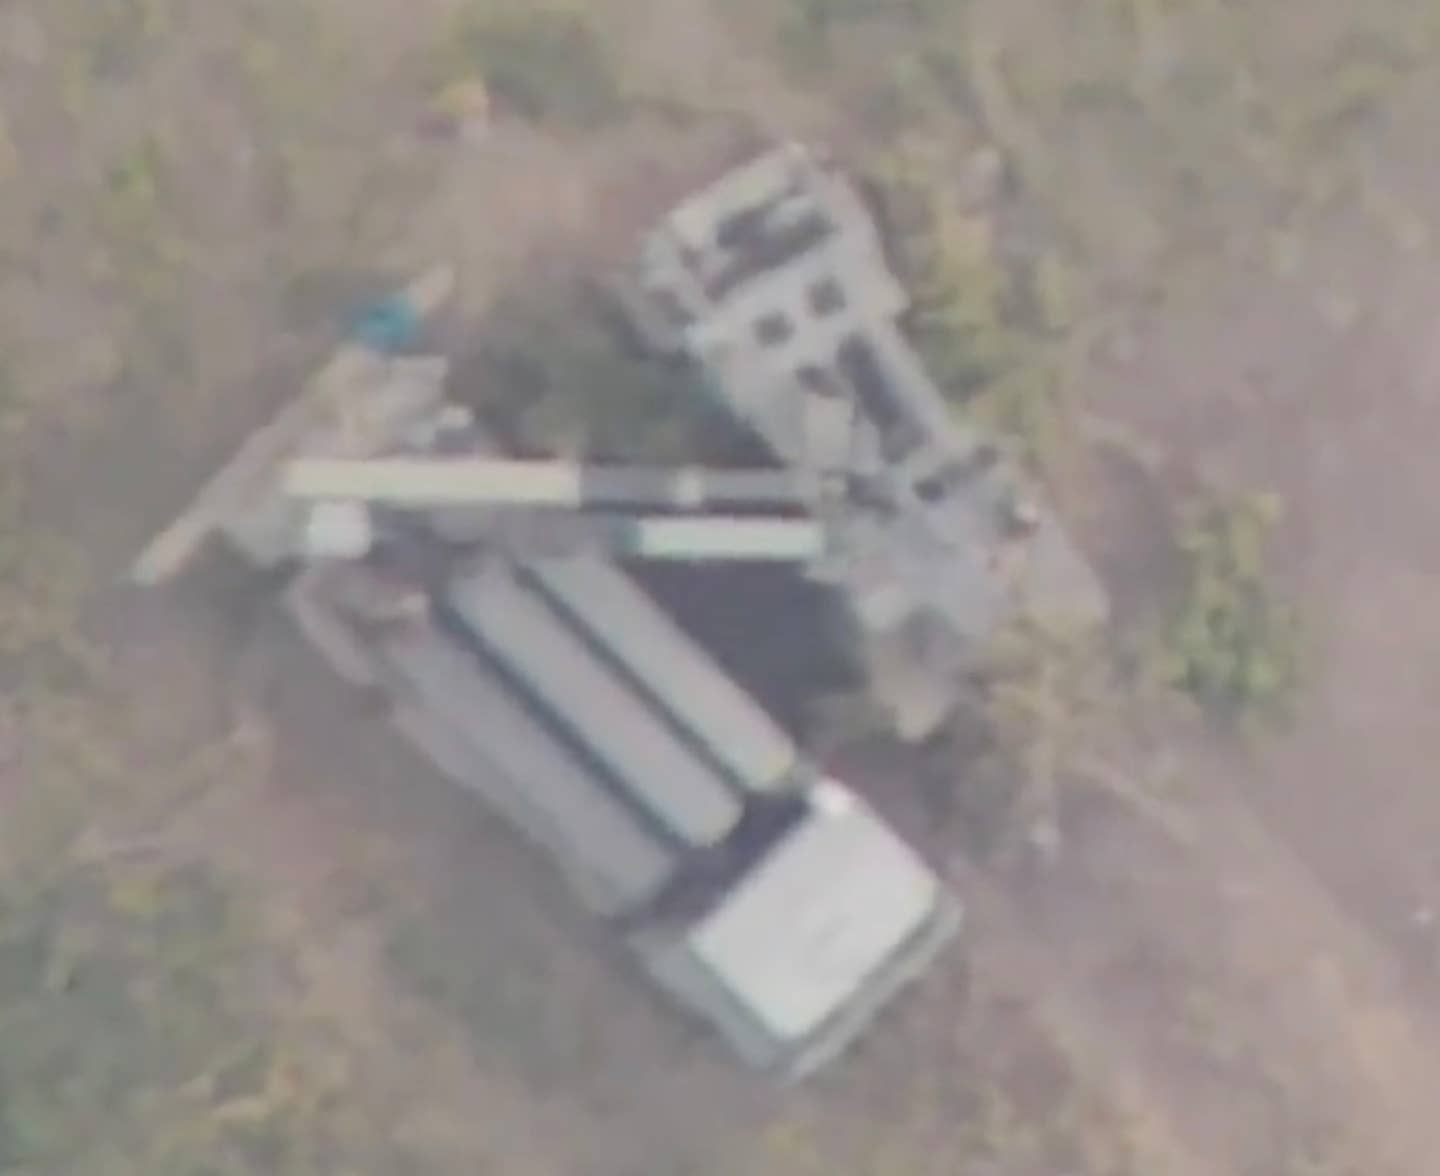 Missile launcher and transport vehicle seen in the video. <em>Twitter screencap</em>